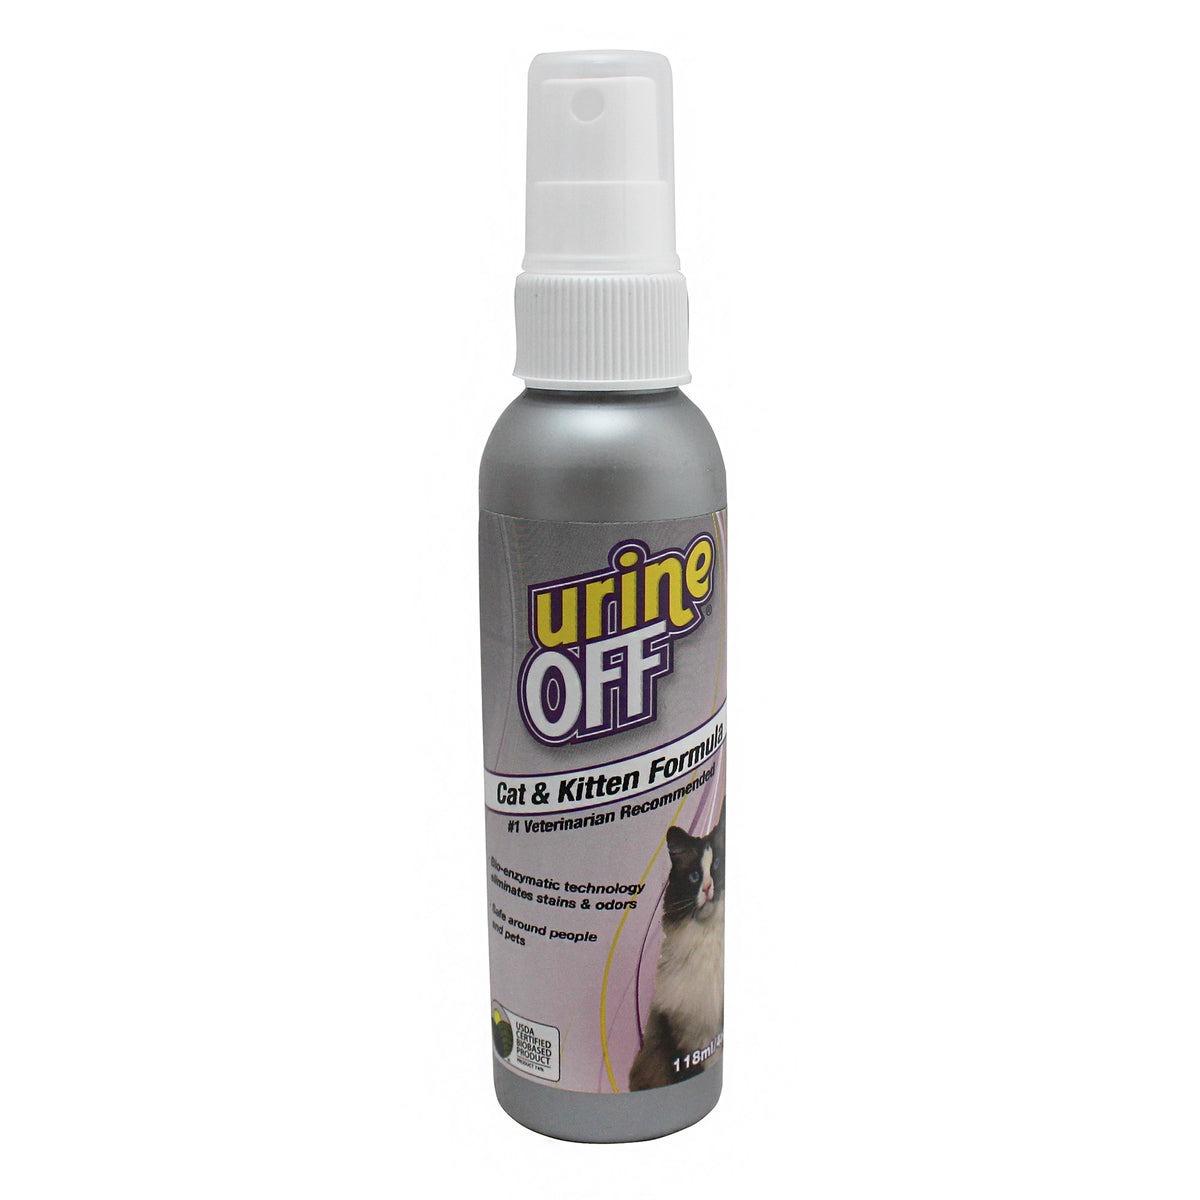 Urine Off Odour &amp; Stain Remover for Cats &amp; Kittens